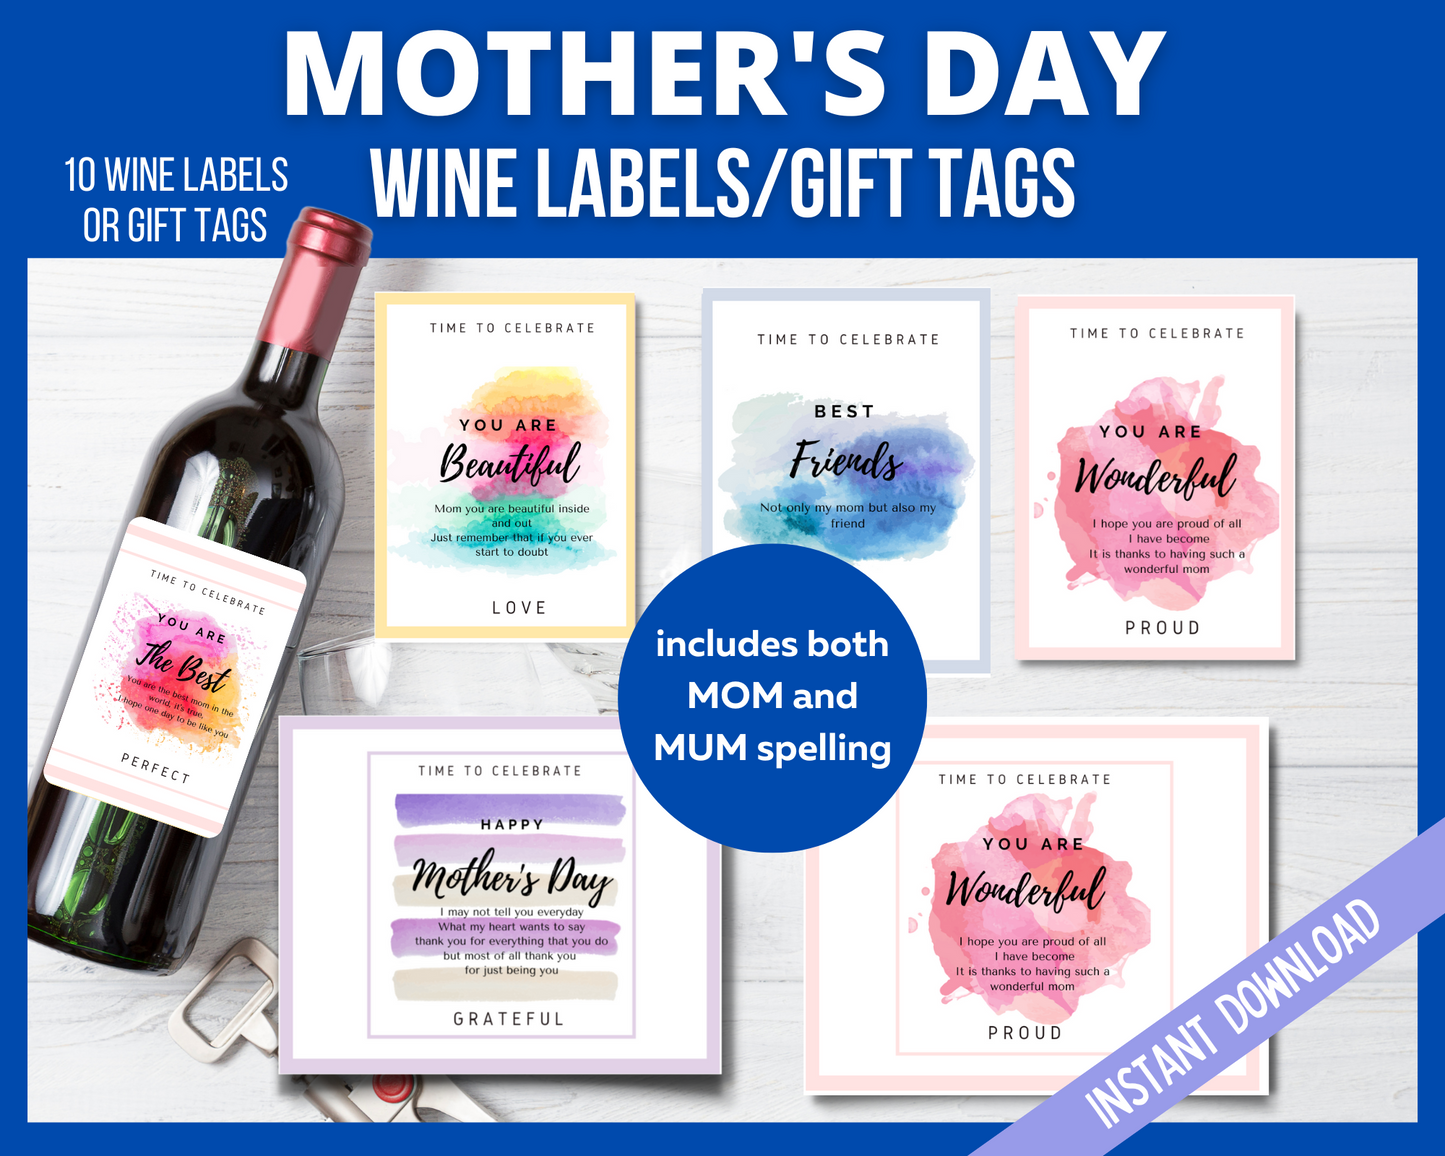 Printable Mothers Day Wine Labels and Gift Tags